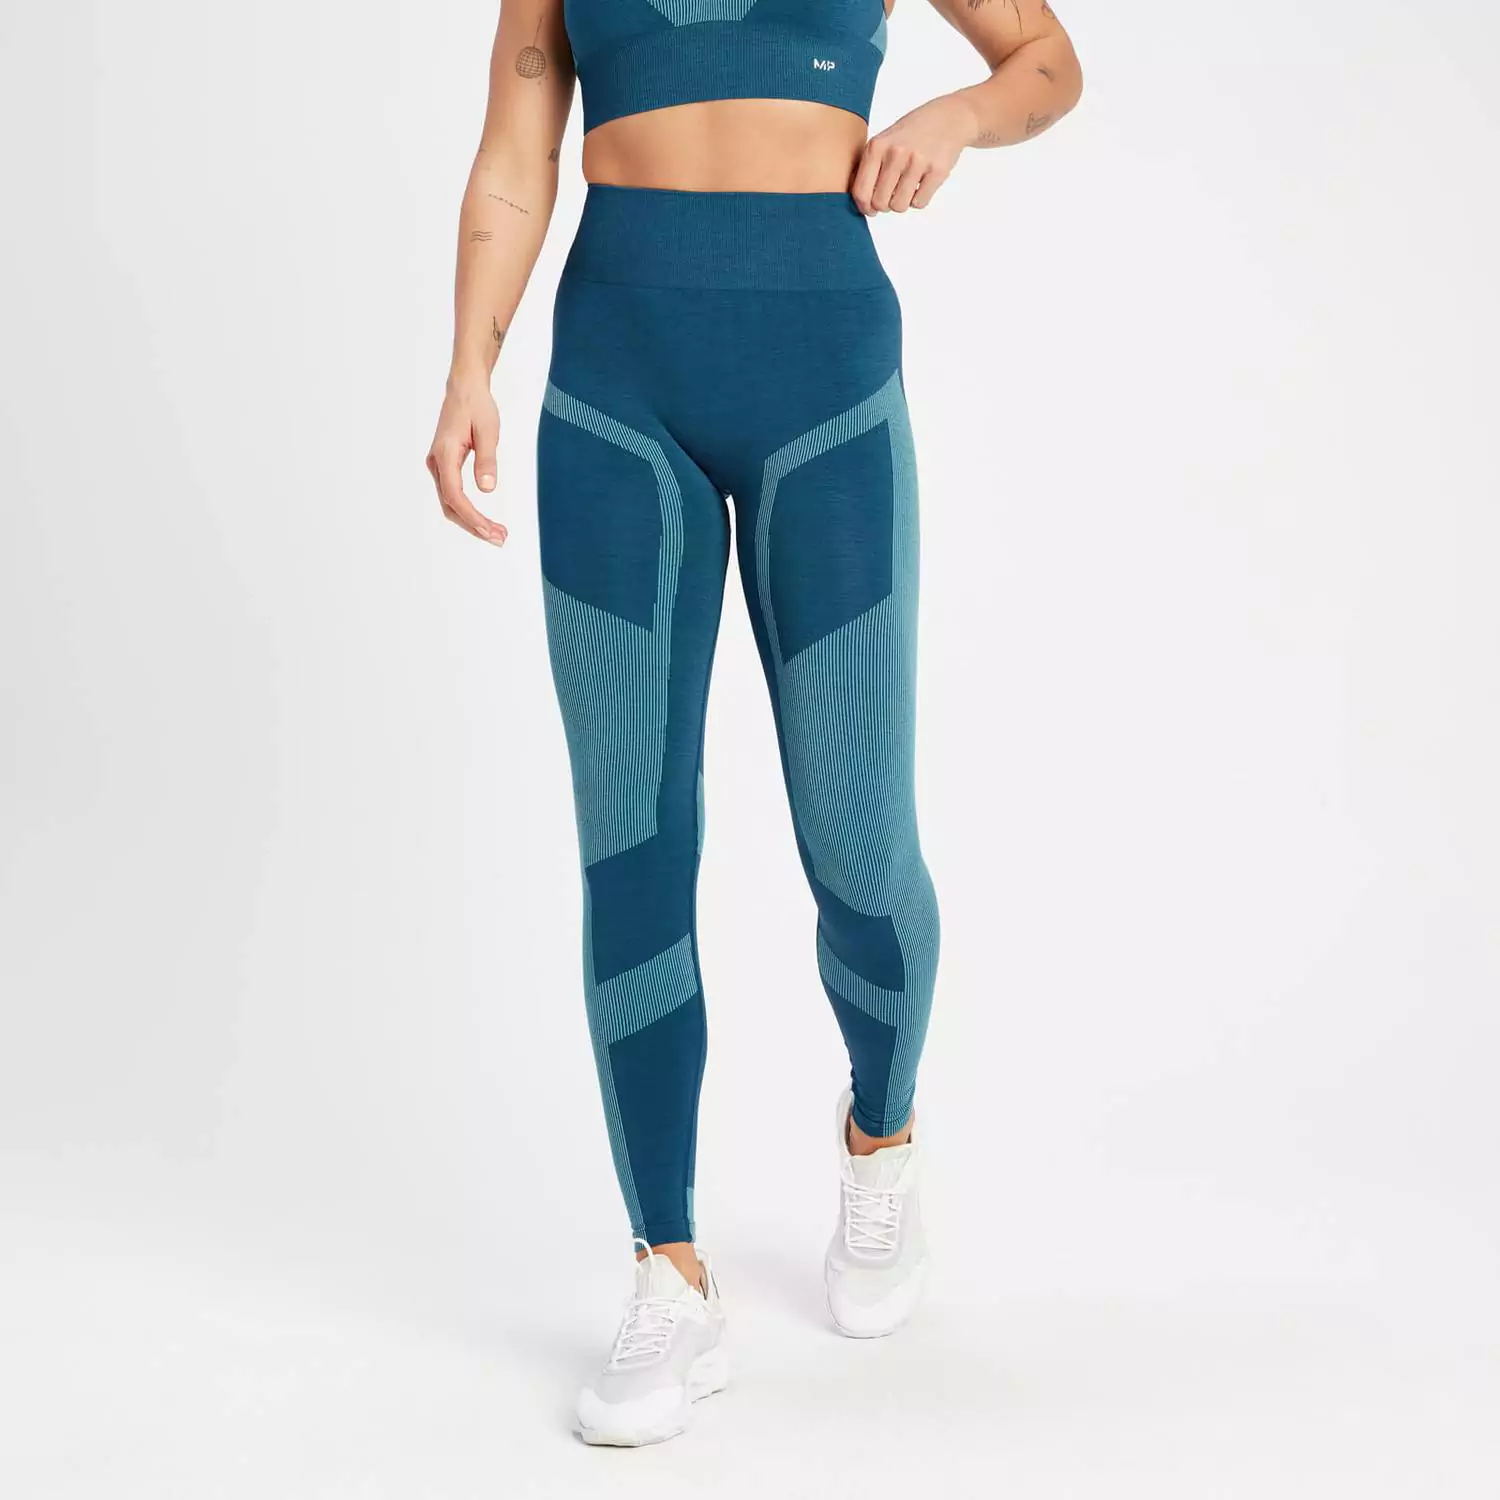 Myprotein Women's Impact Scrunch Seamless Leggings - Teal Blue Discounts and Cashback